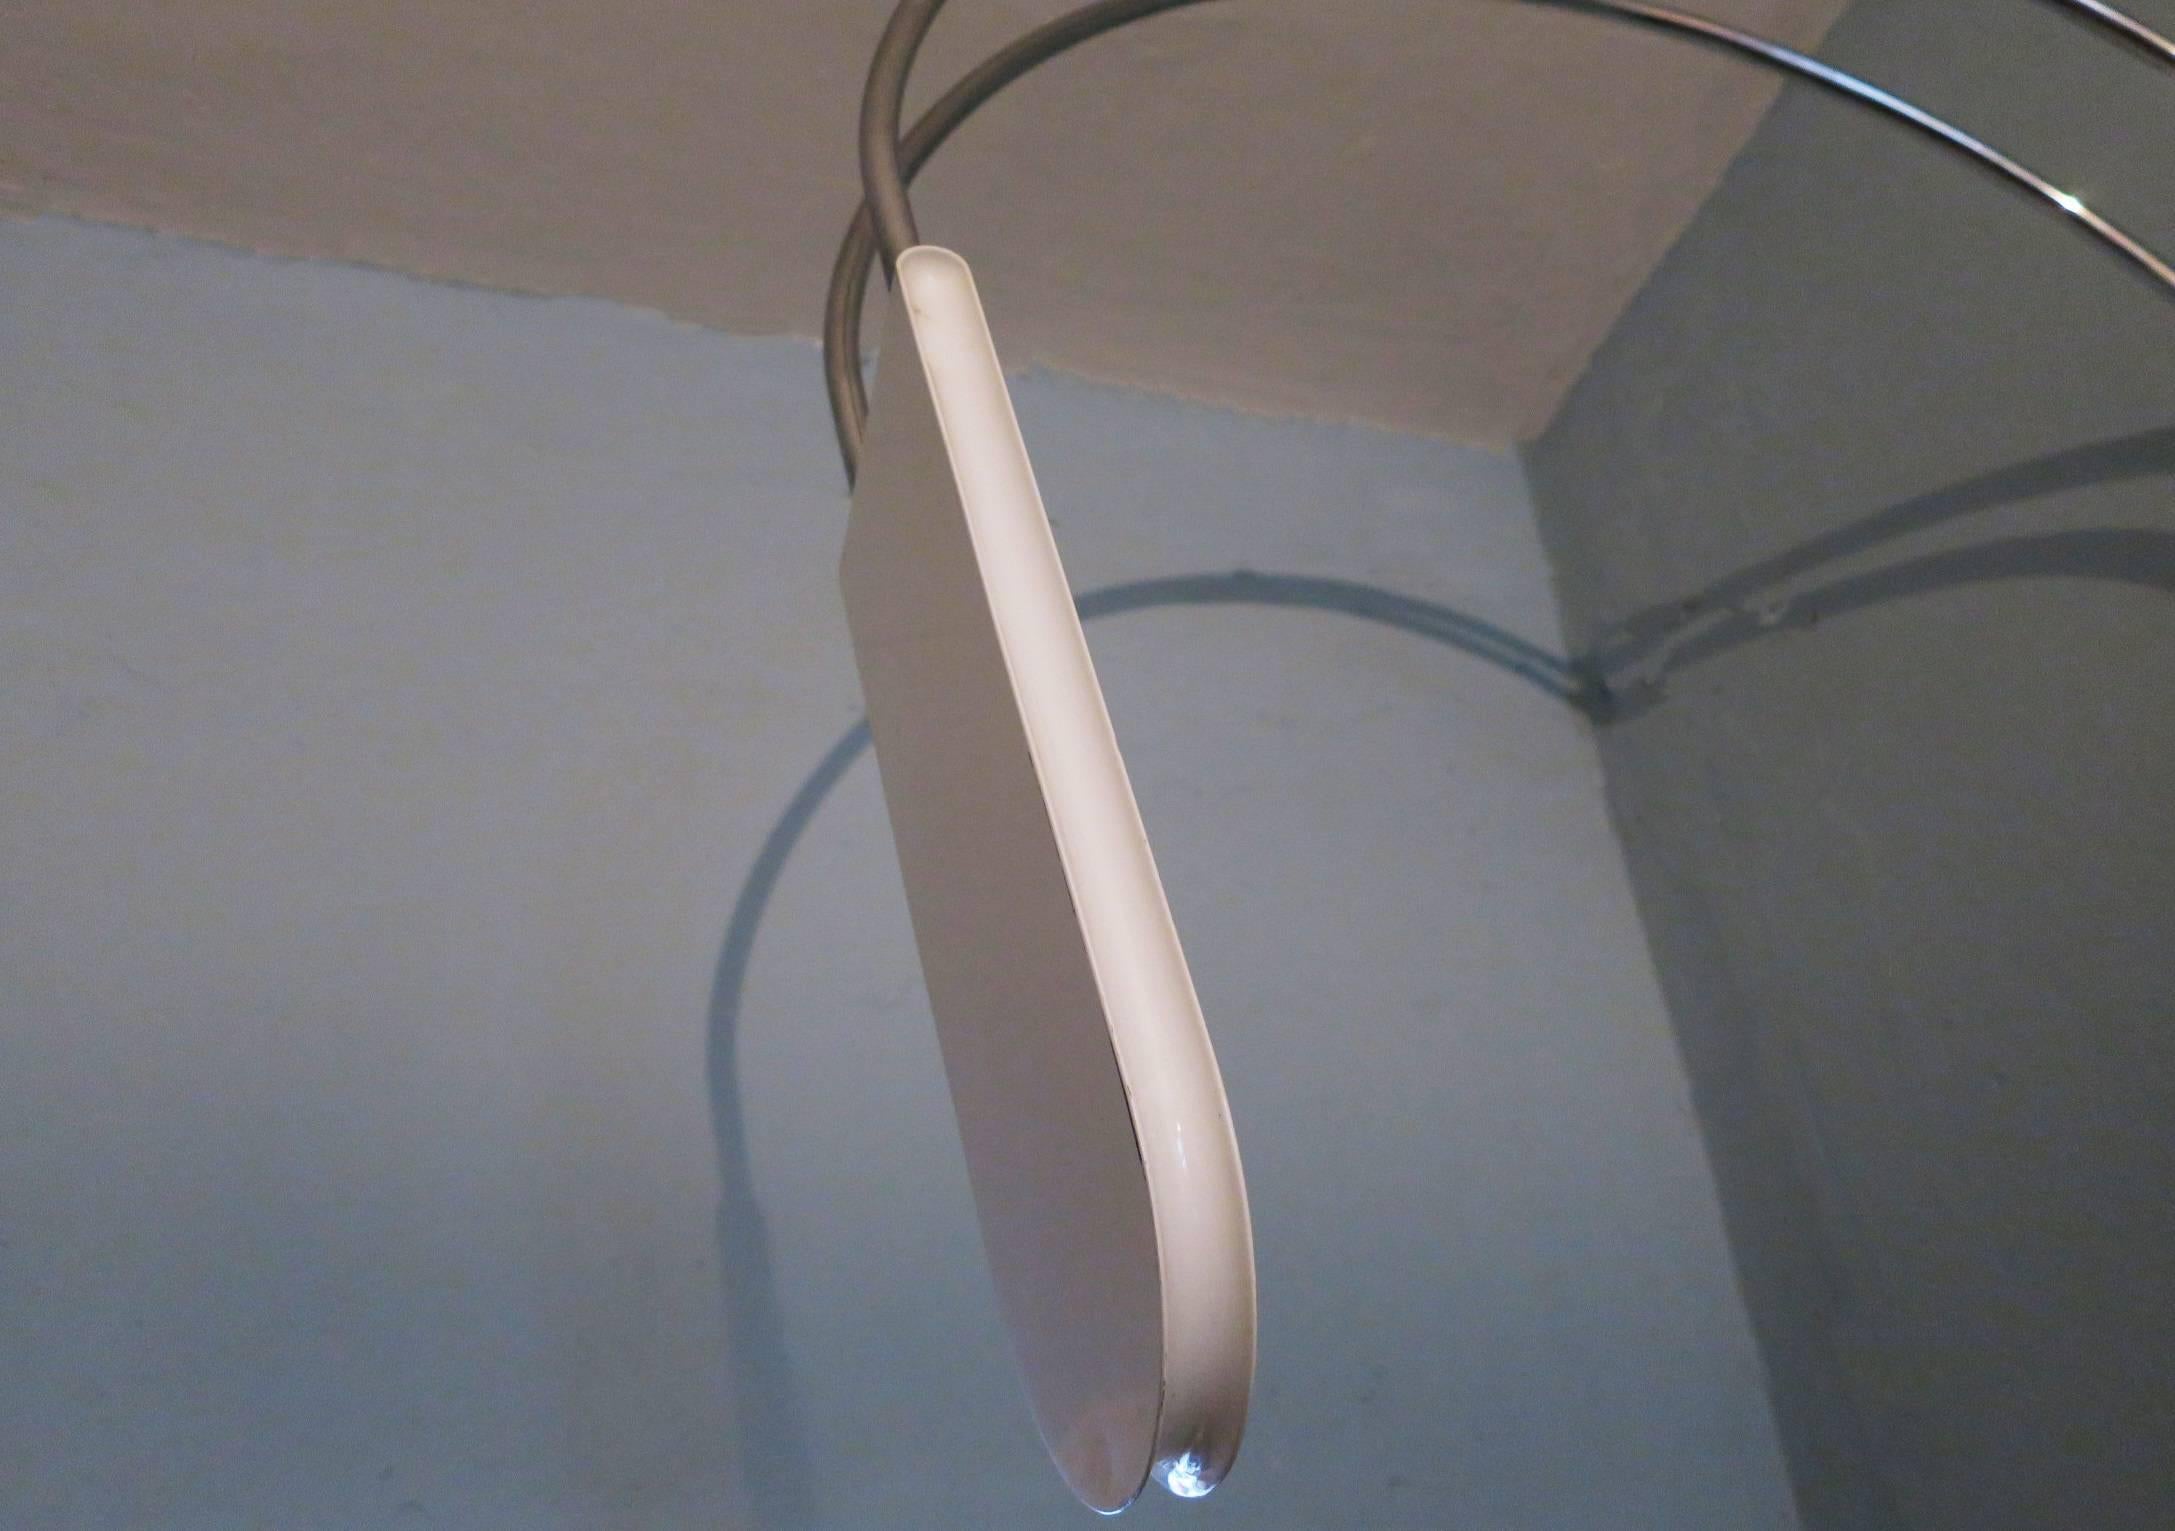 Bruno Gecchelin Italian arc ceiling or wall light, 1970s. The lamp gives a strong light and can be used with a dimmer.